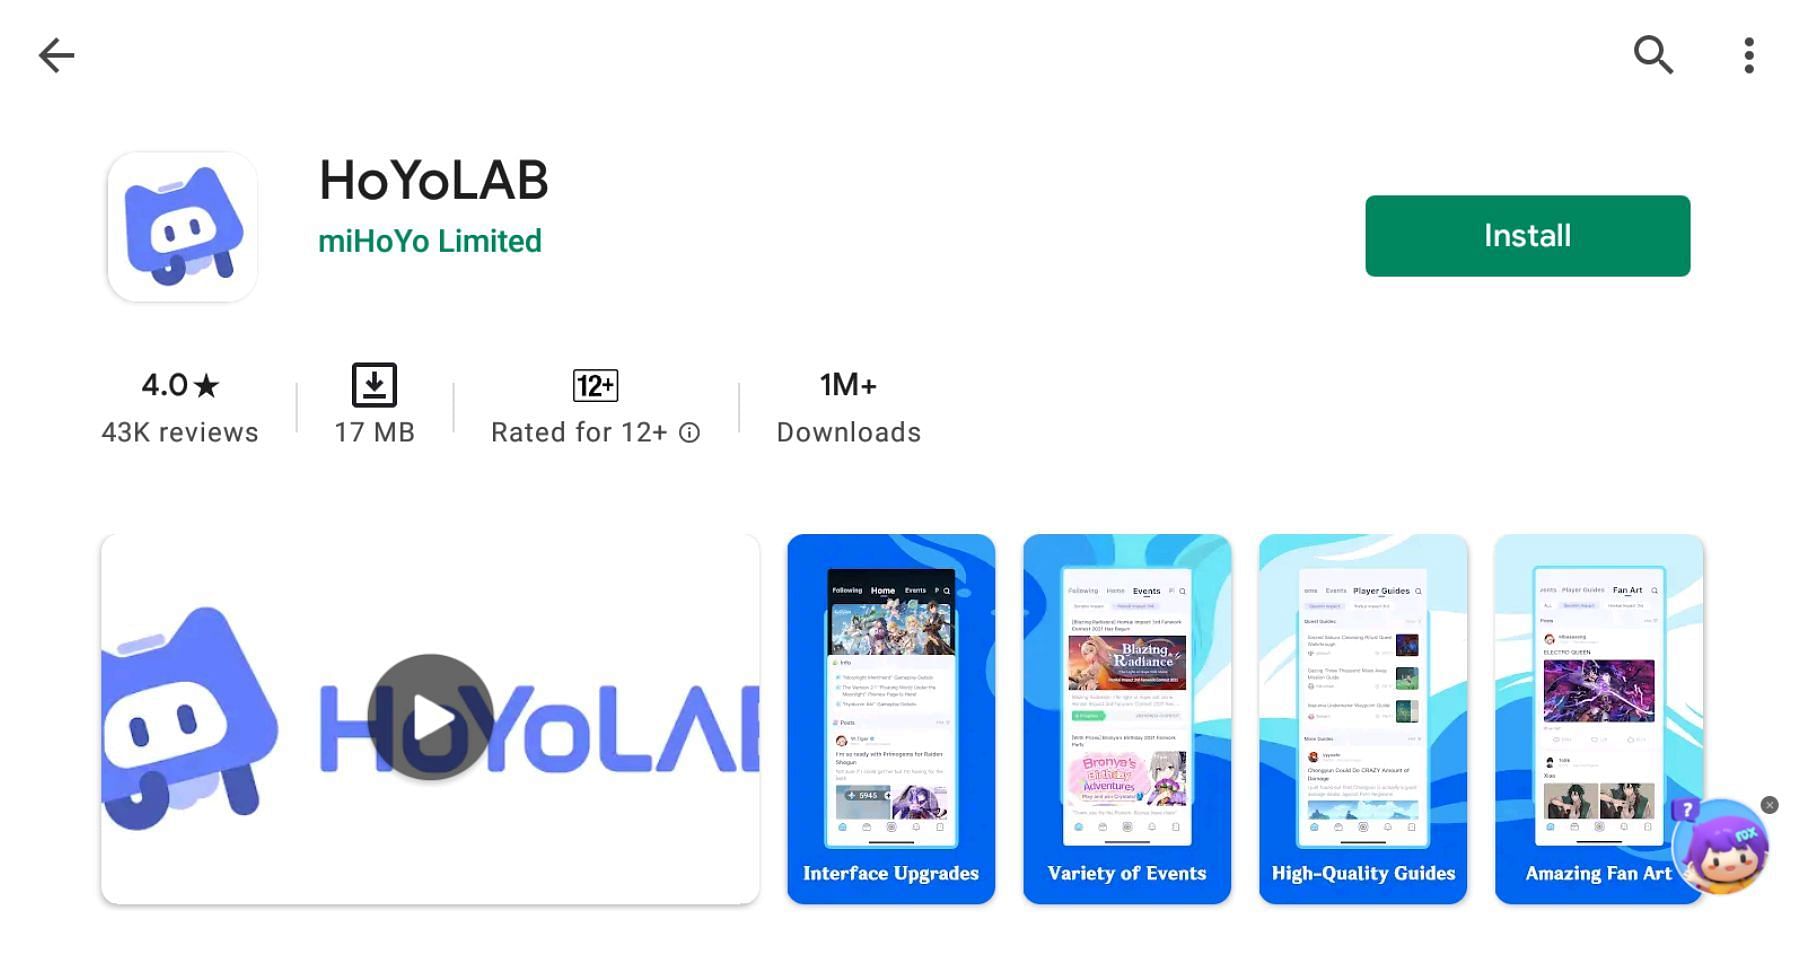 Install HoYoLAB apps by miHoYo Limited on Playstore or Appstore (Image via Playstore)